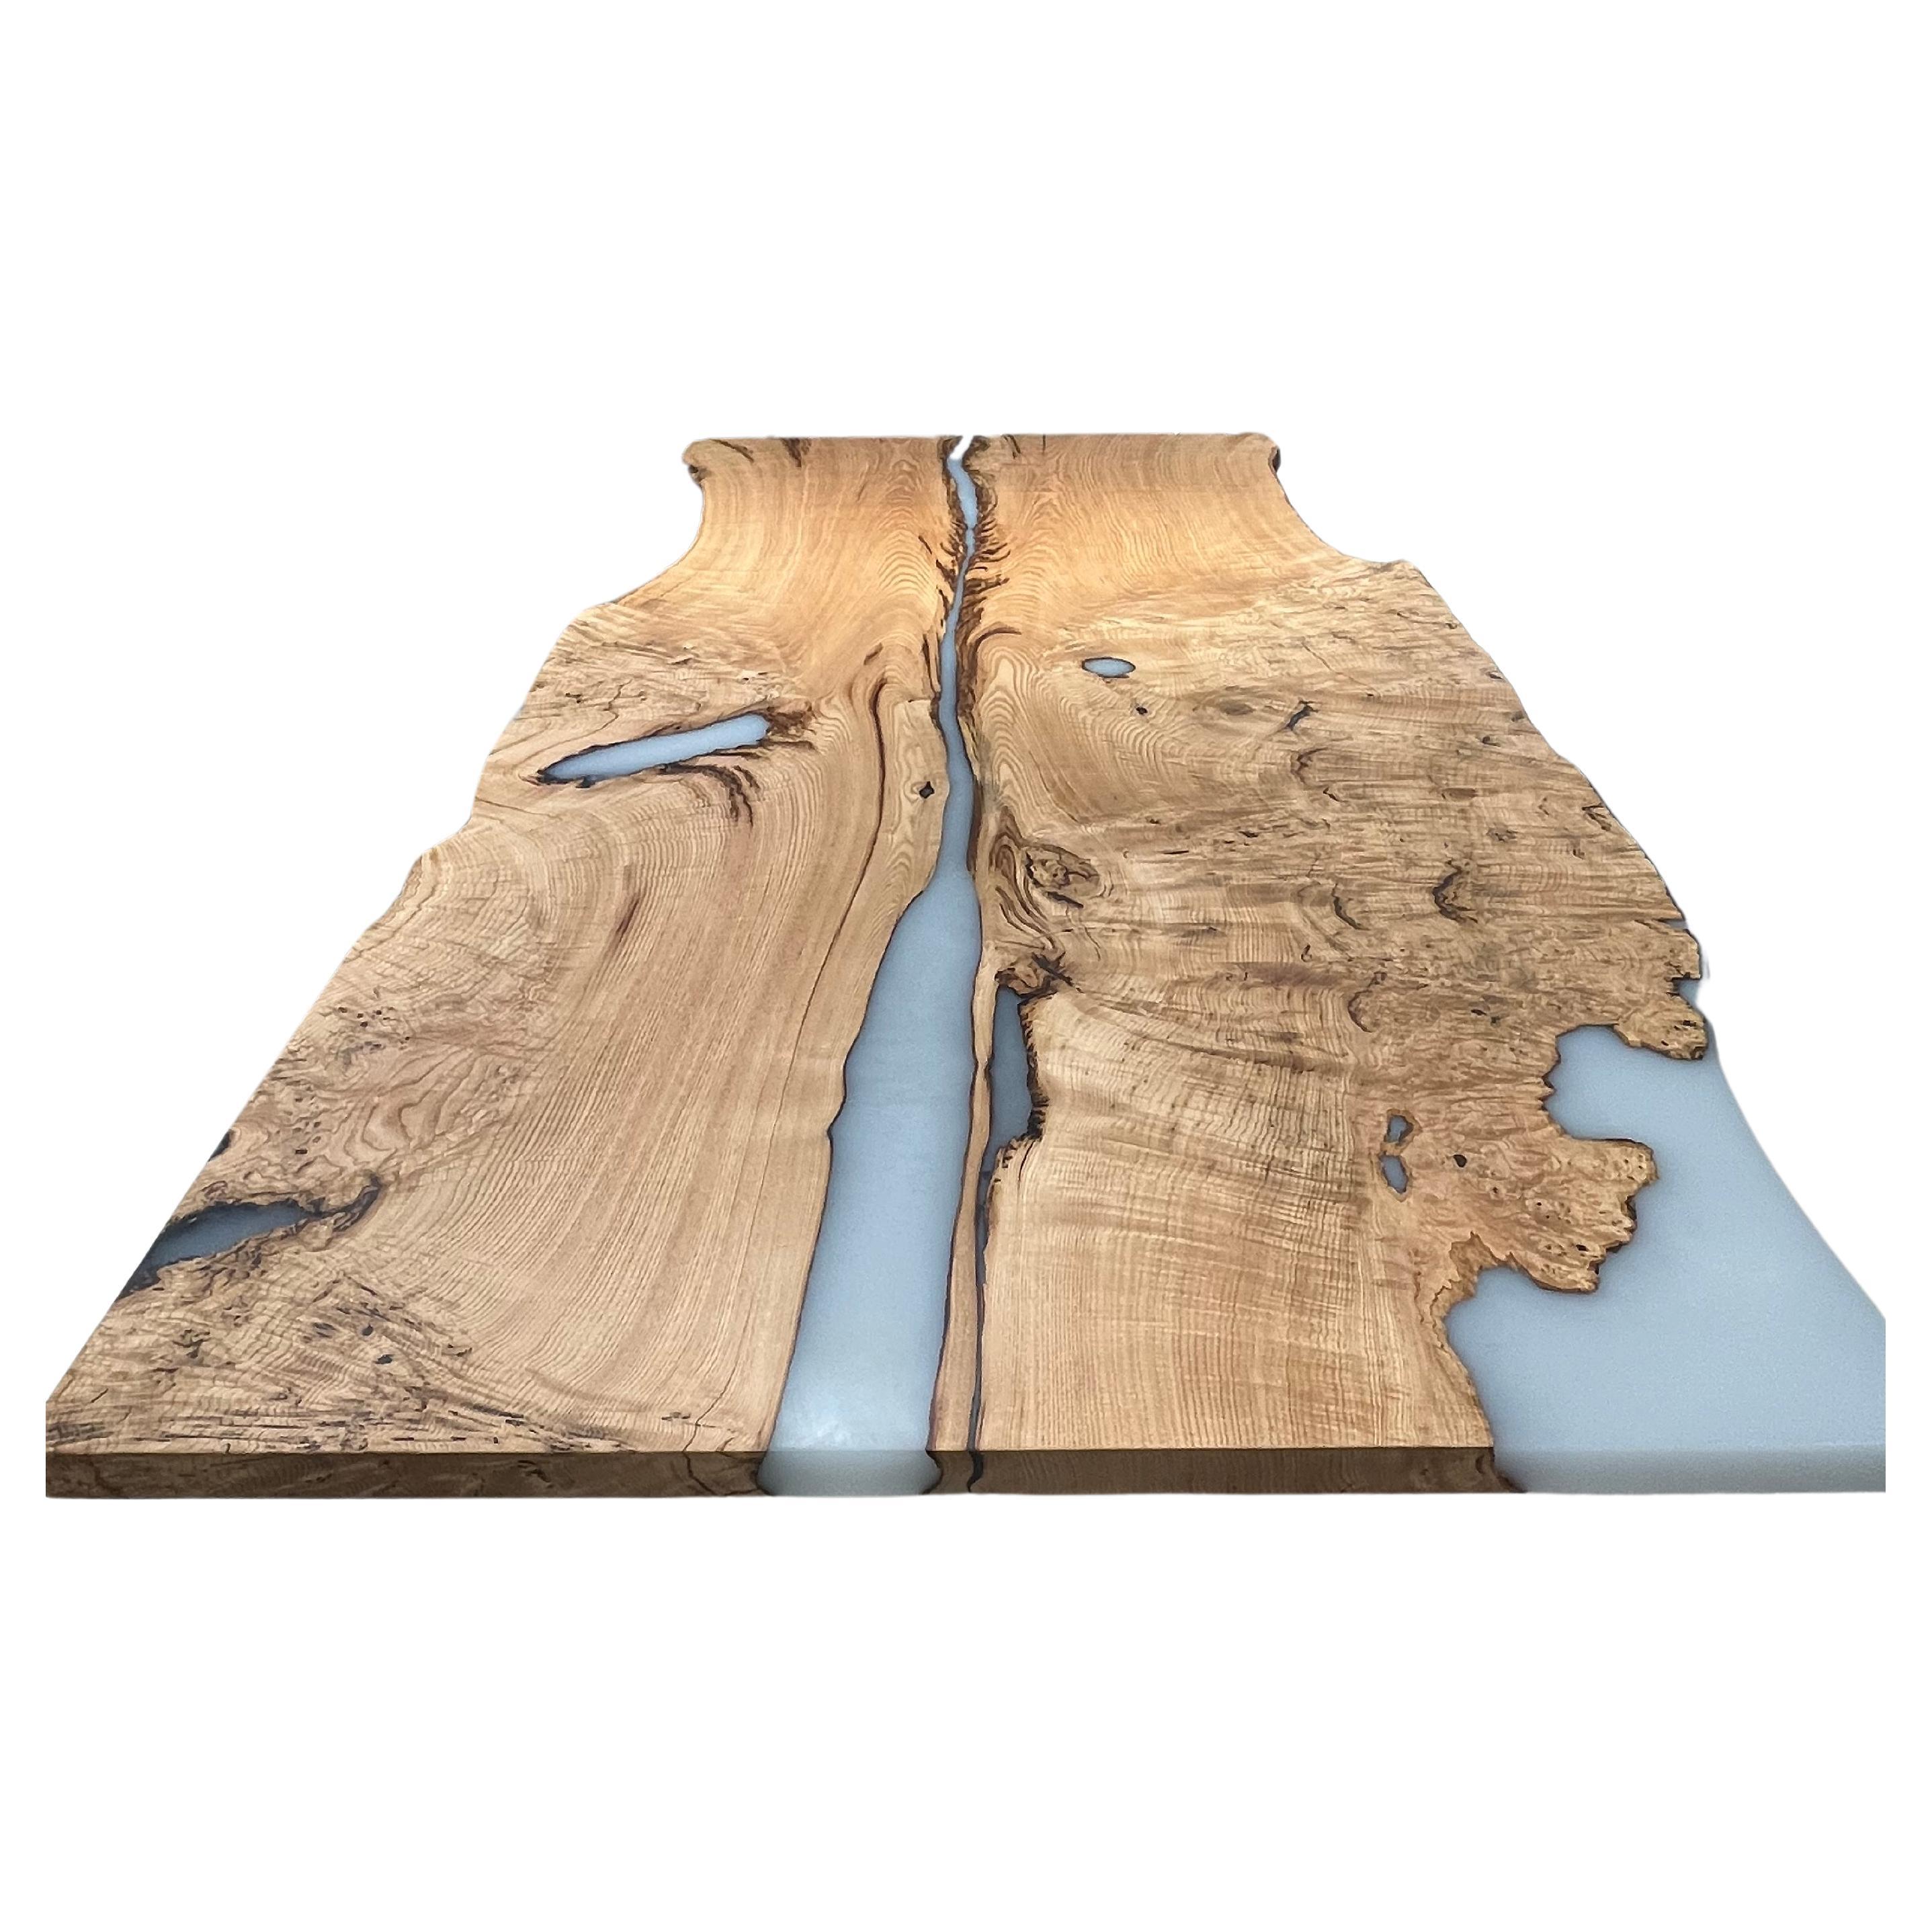 Light Wood Epoxy Resin Conference Table For Sale